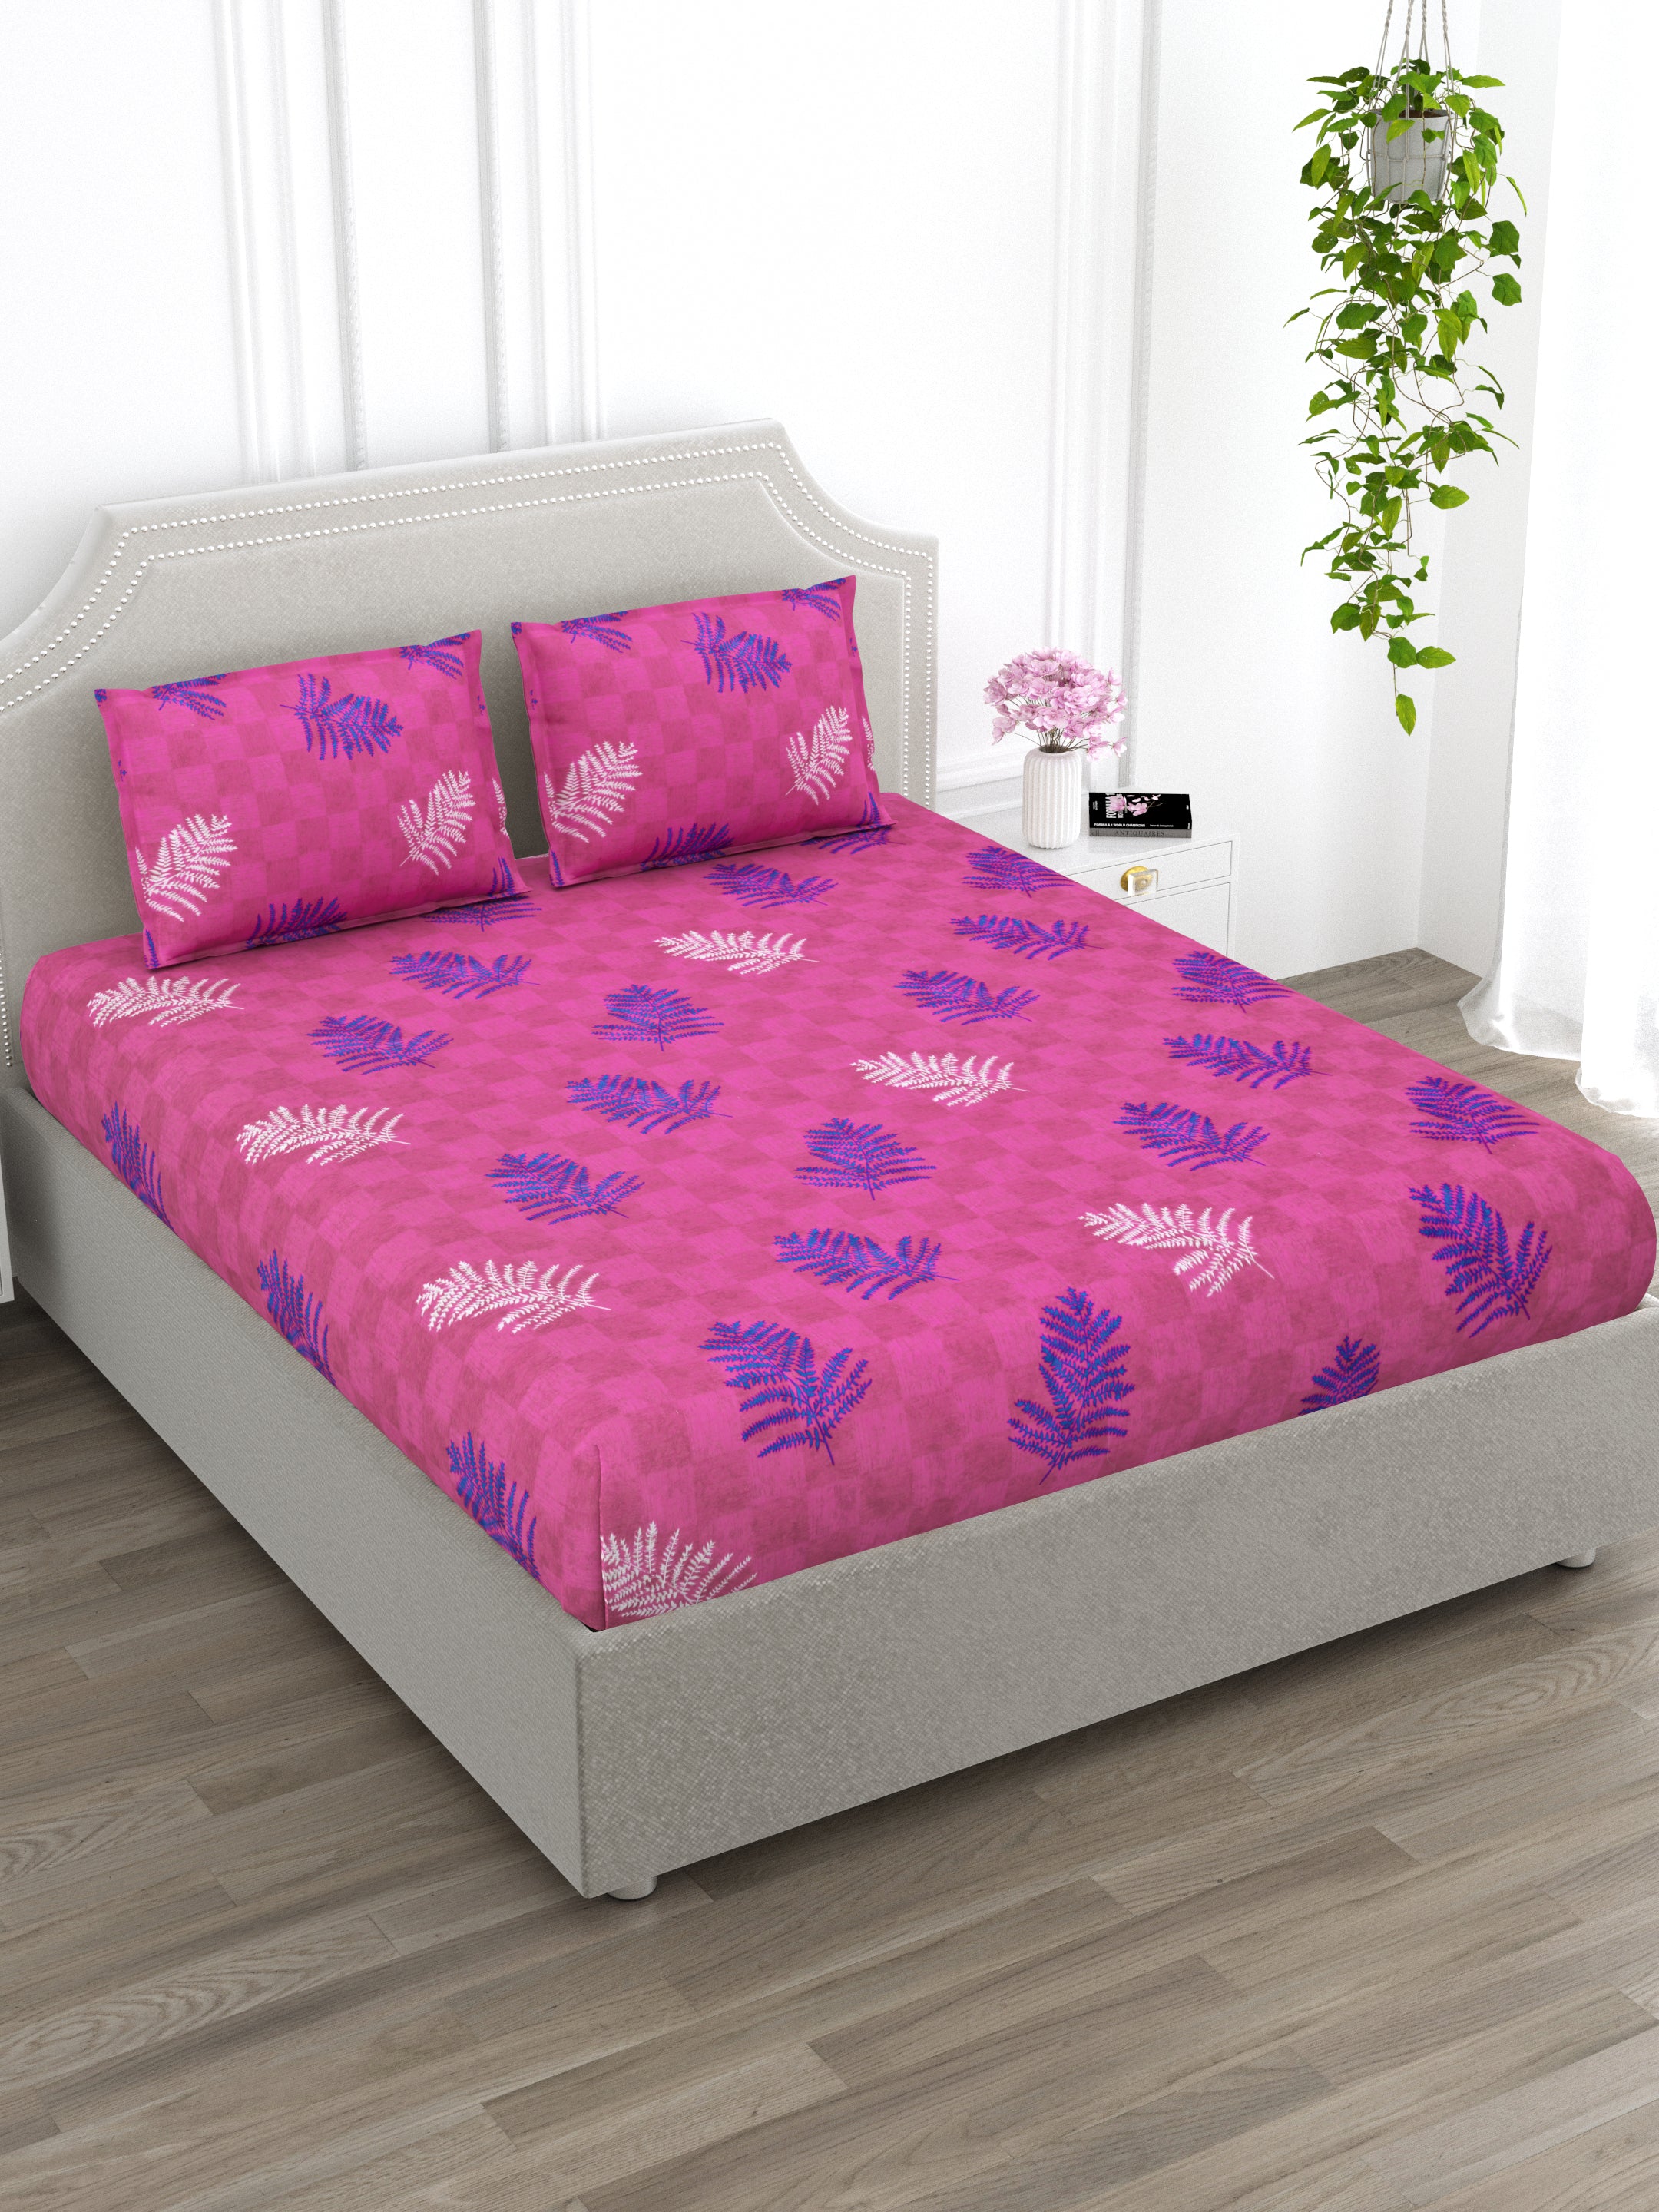 Pink and Blue Ethnic Motifs Super King Size Cotton Bedsheet